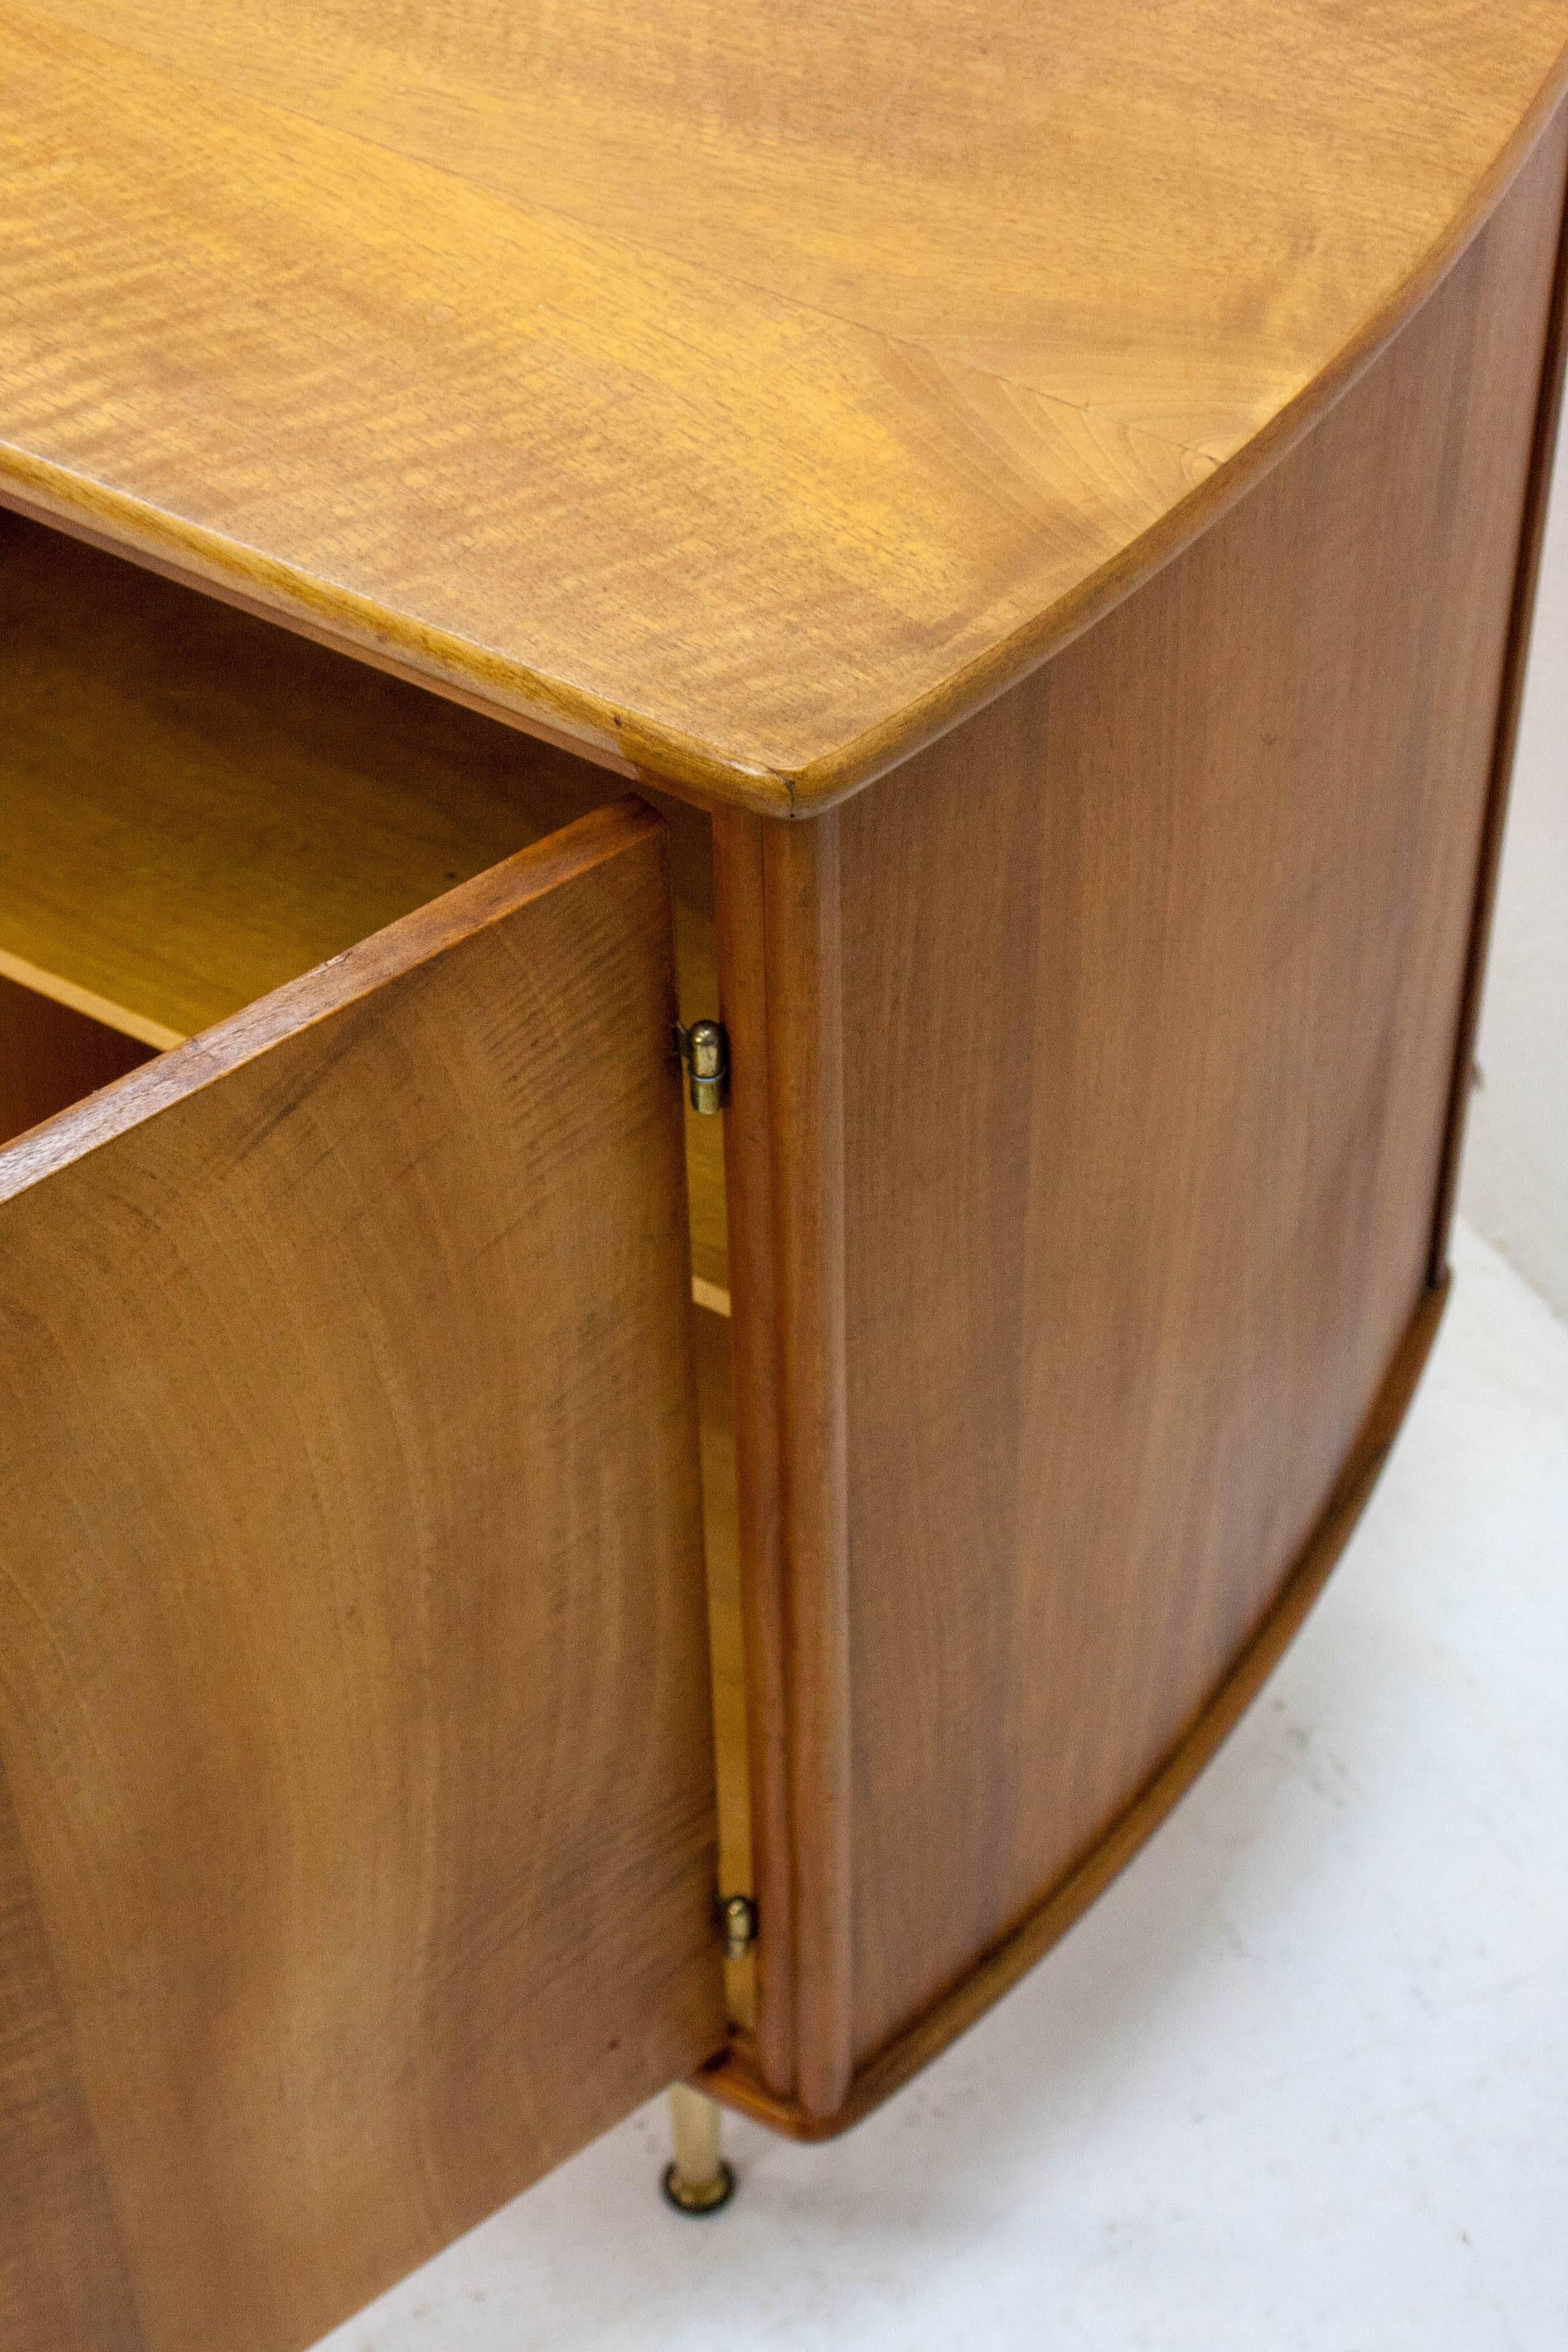 Very nice walnut cabinet designed by William Watting for Dutch manufacturer Fristho Franeker in the 1960s. Note the gentle curve to the sides.